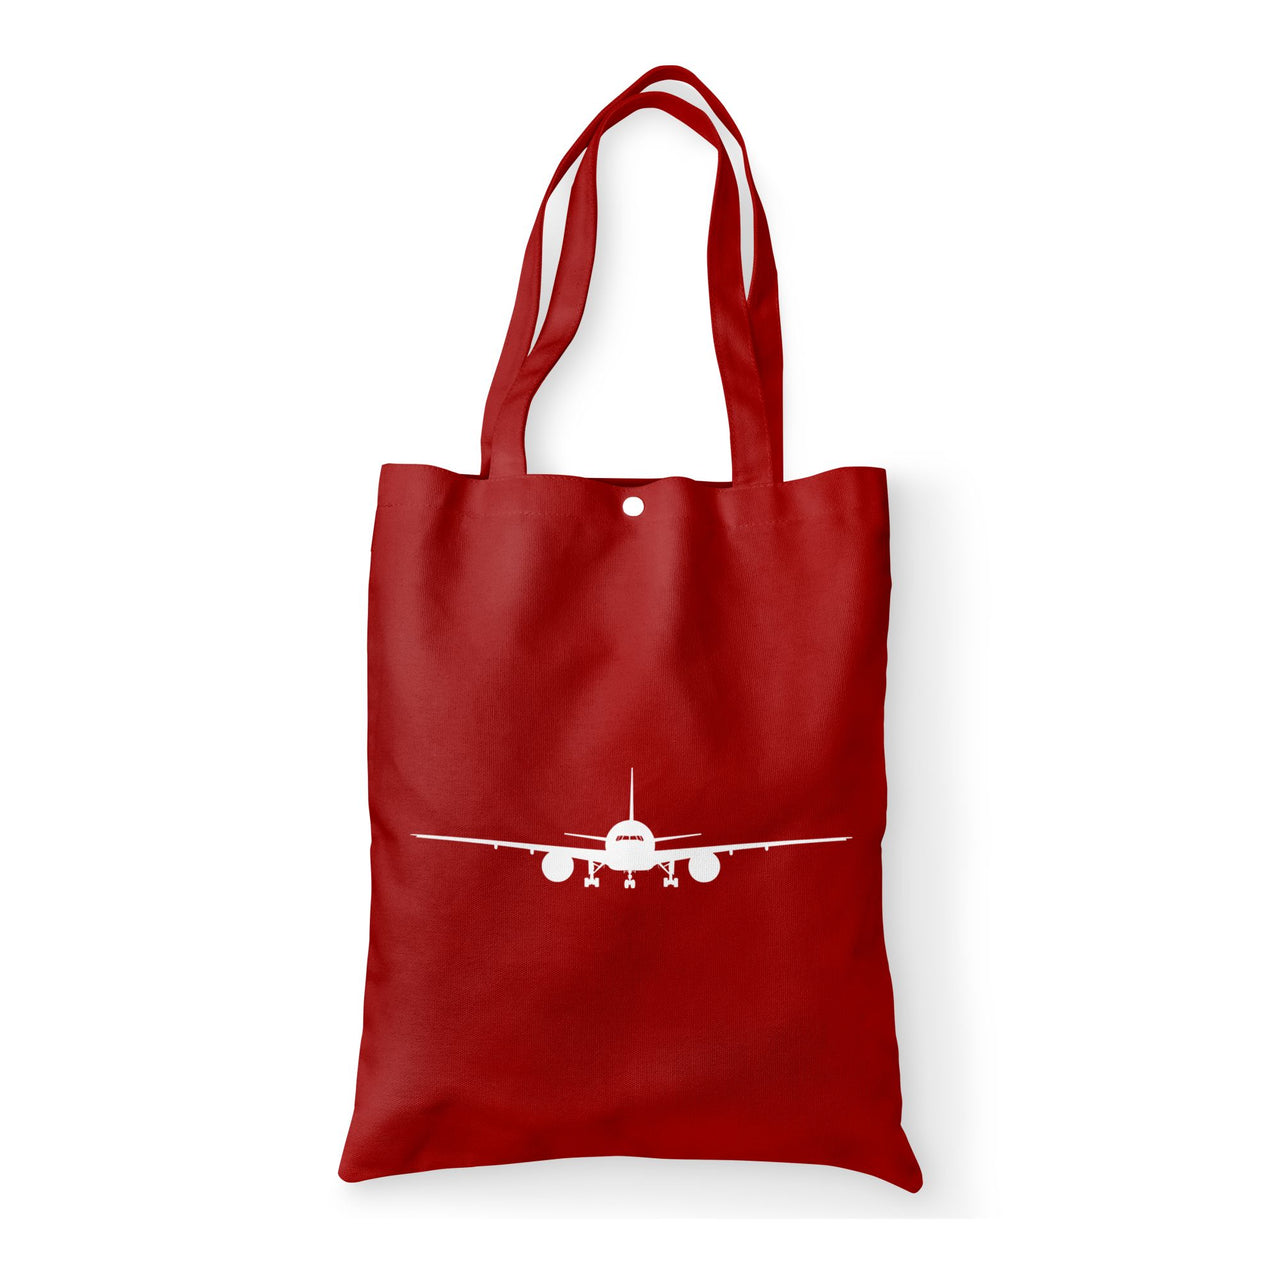 Boeing 777 Silhouette Designed Tote Bags